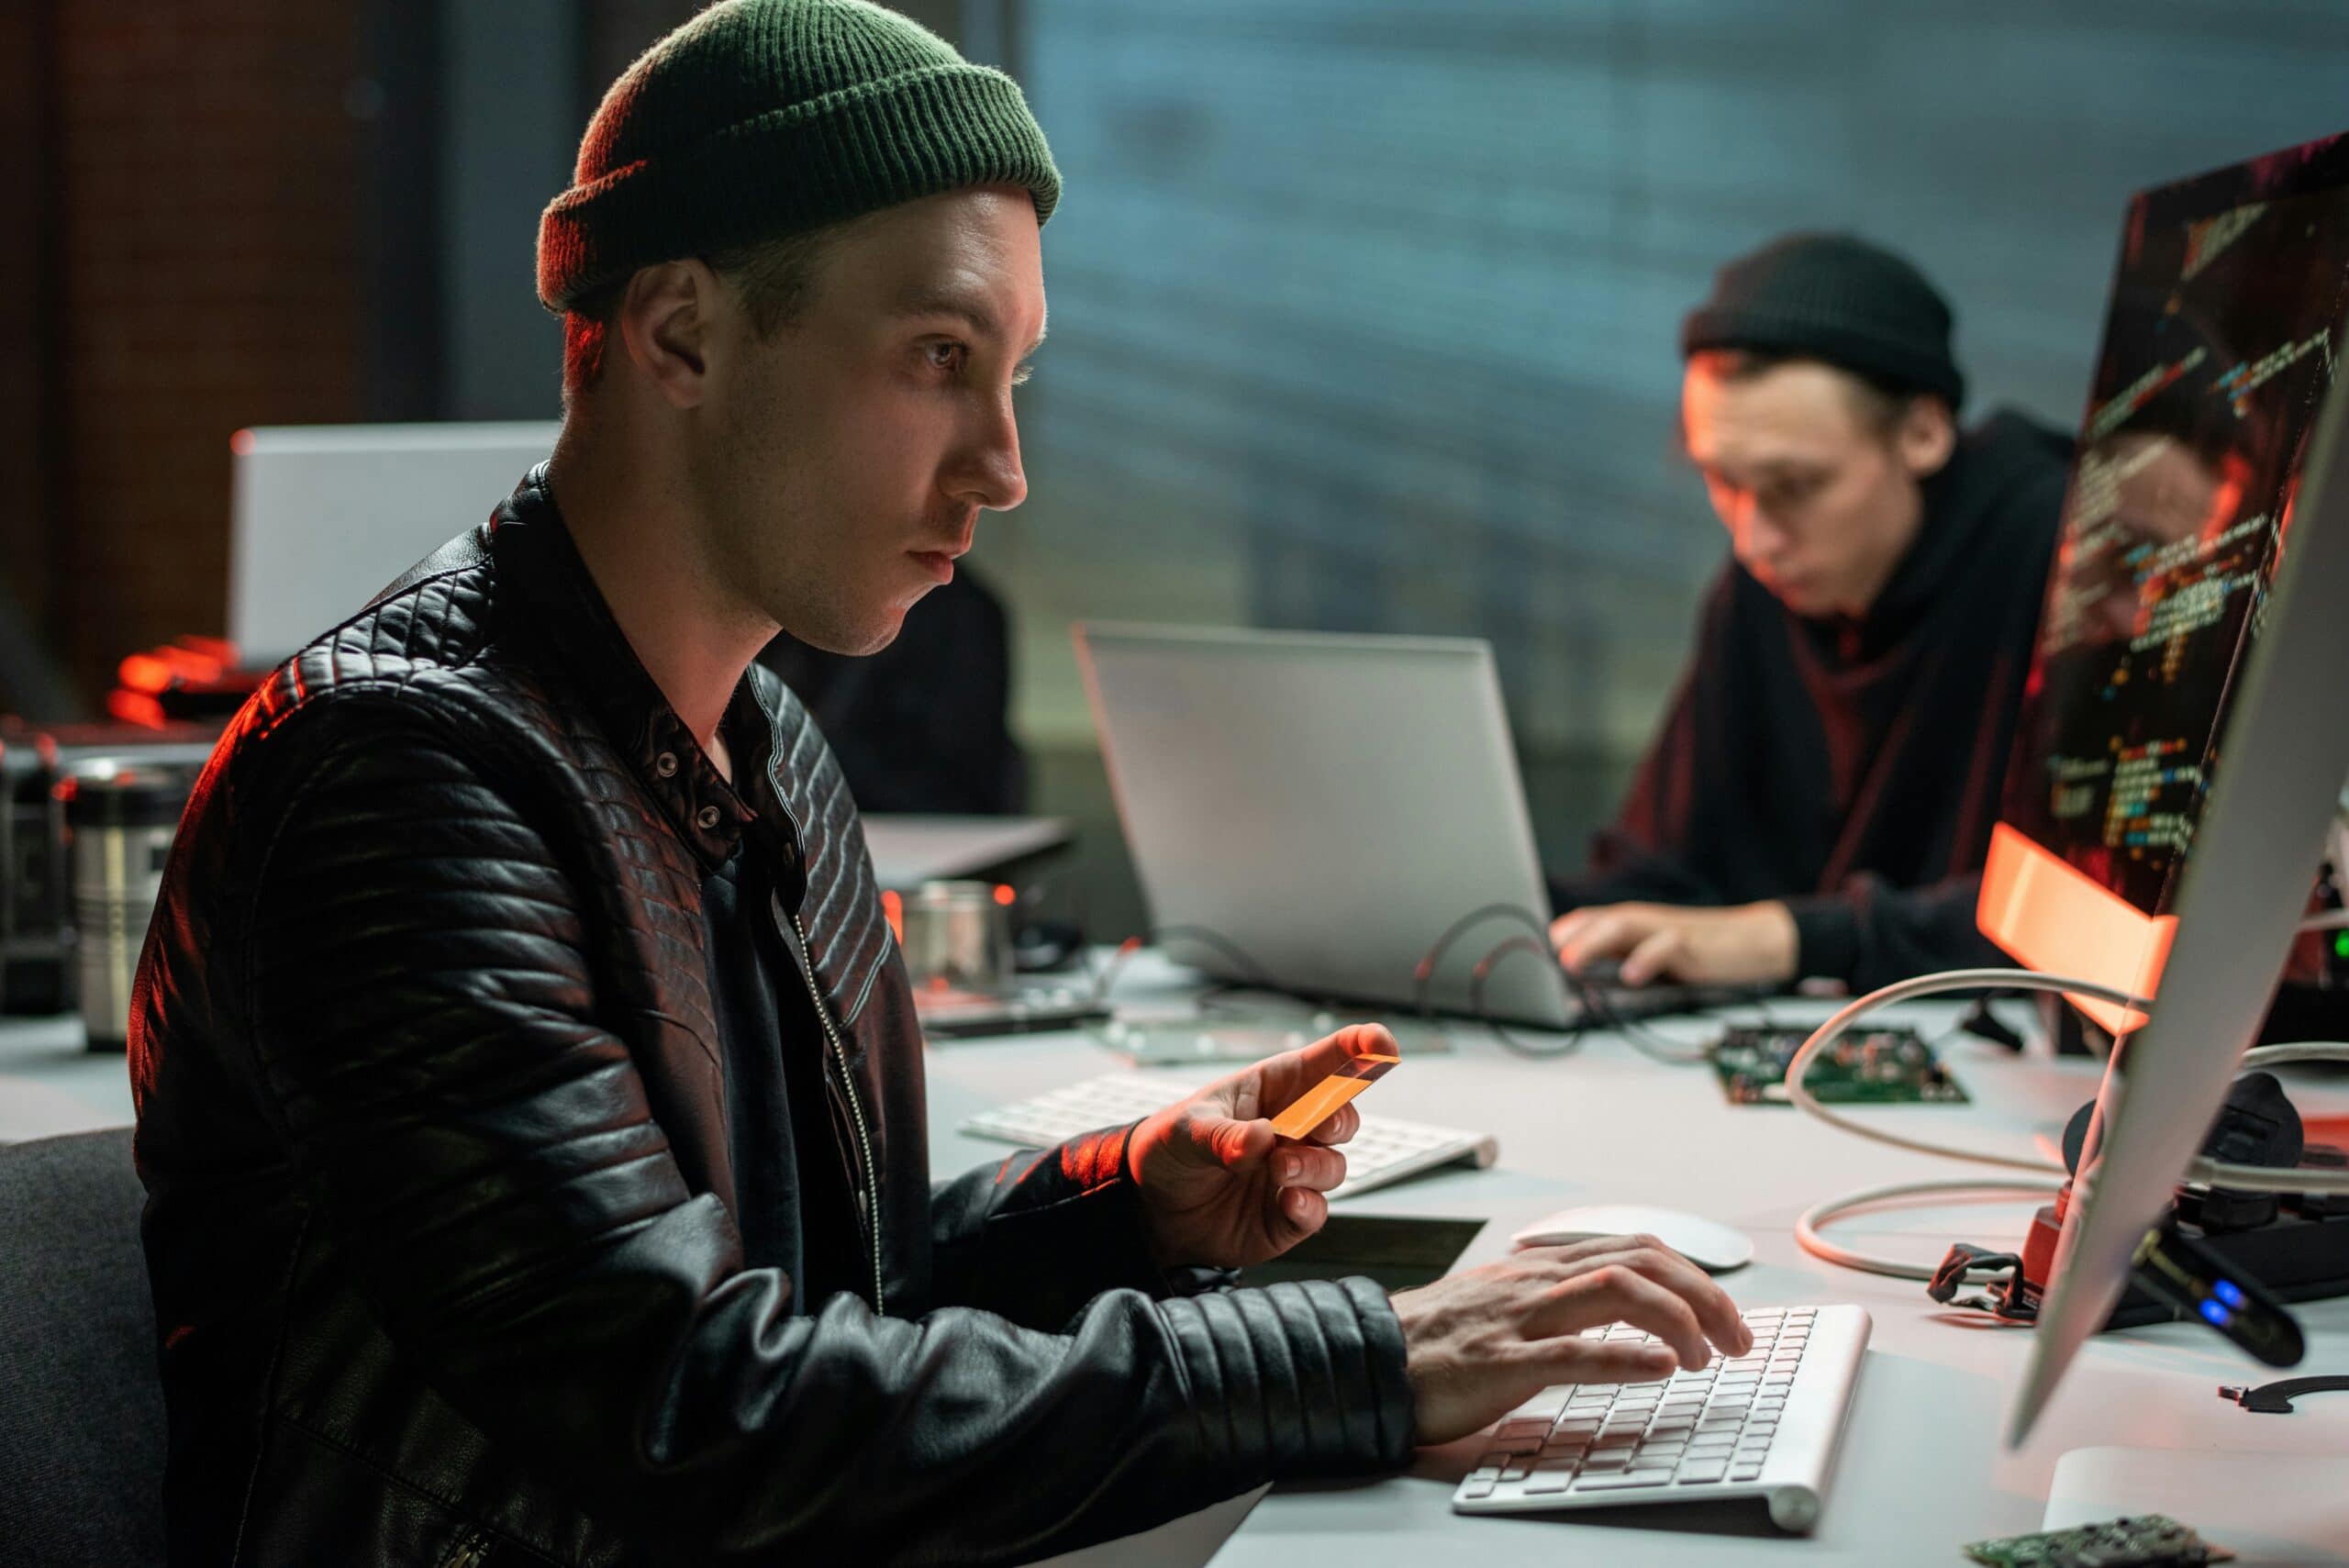 A man wearing a beanie is using a computer for cyber-attacks.